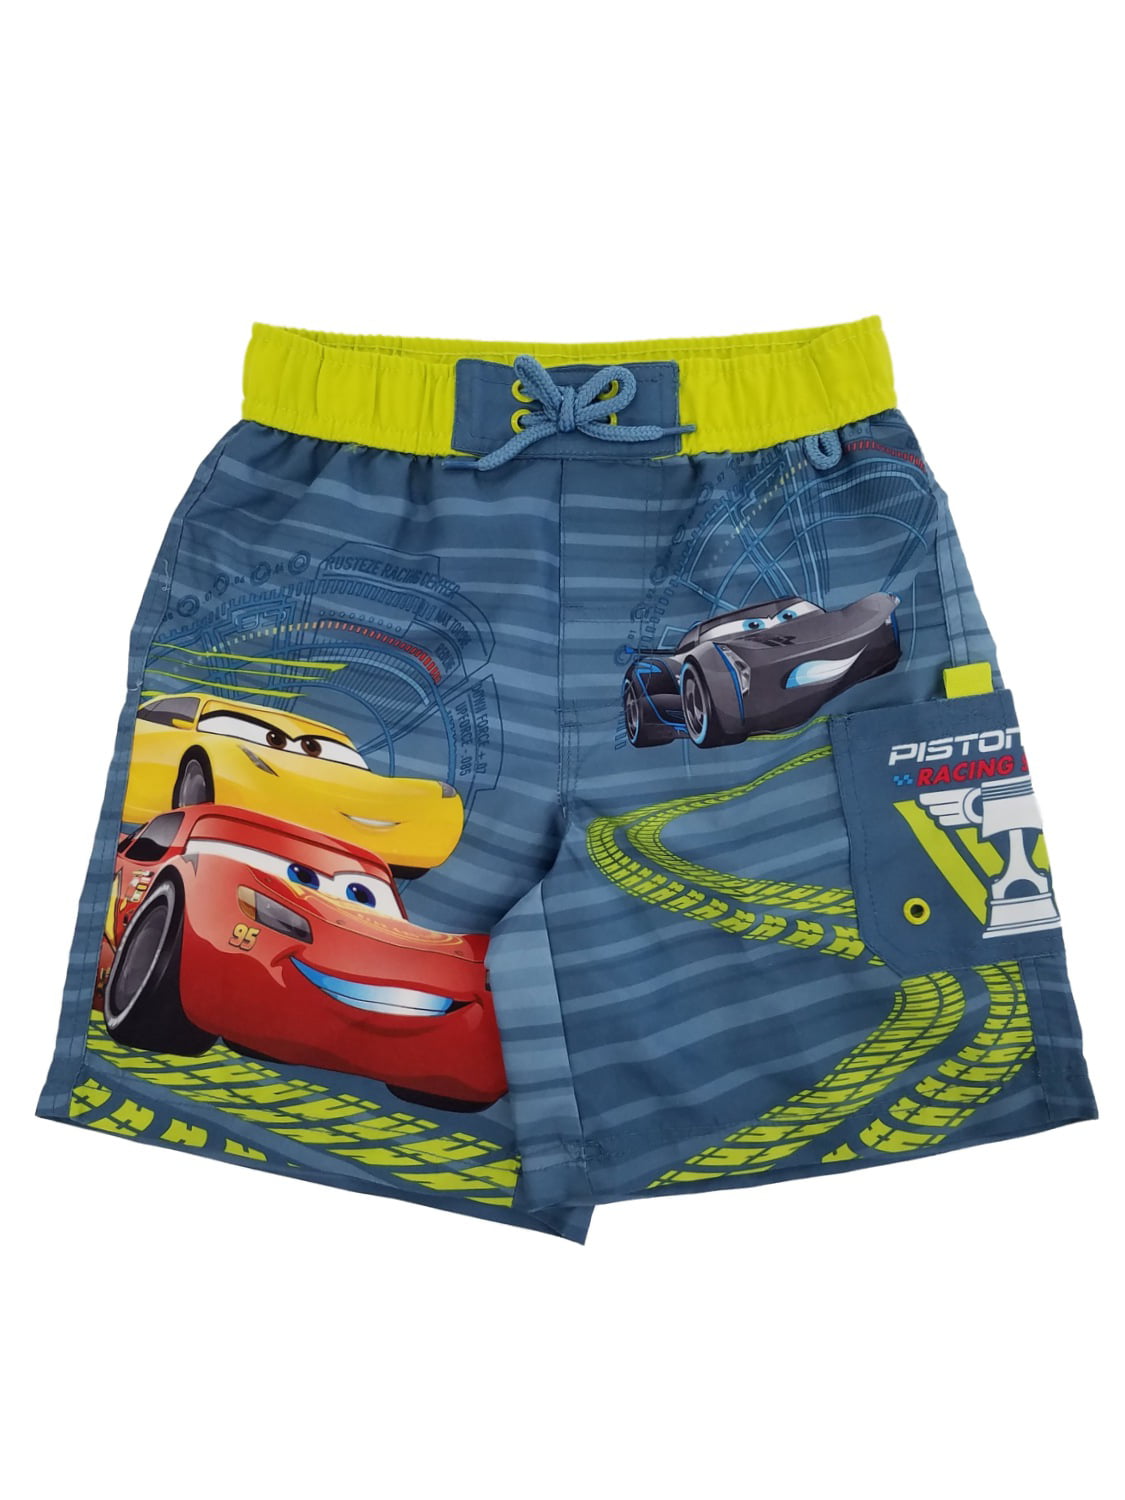 Disney Pixar Cars Official Boys Swimsuit Swimming Boxers Briefs Trunks Red 3